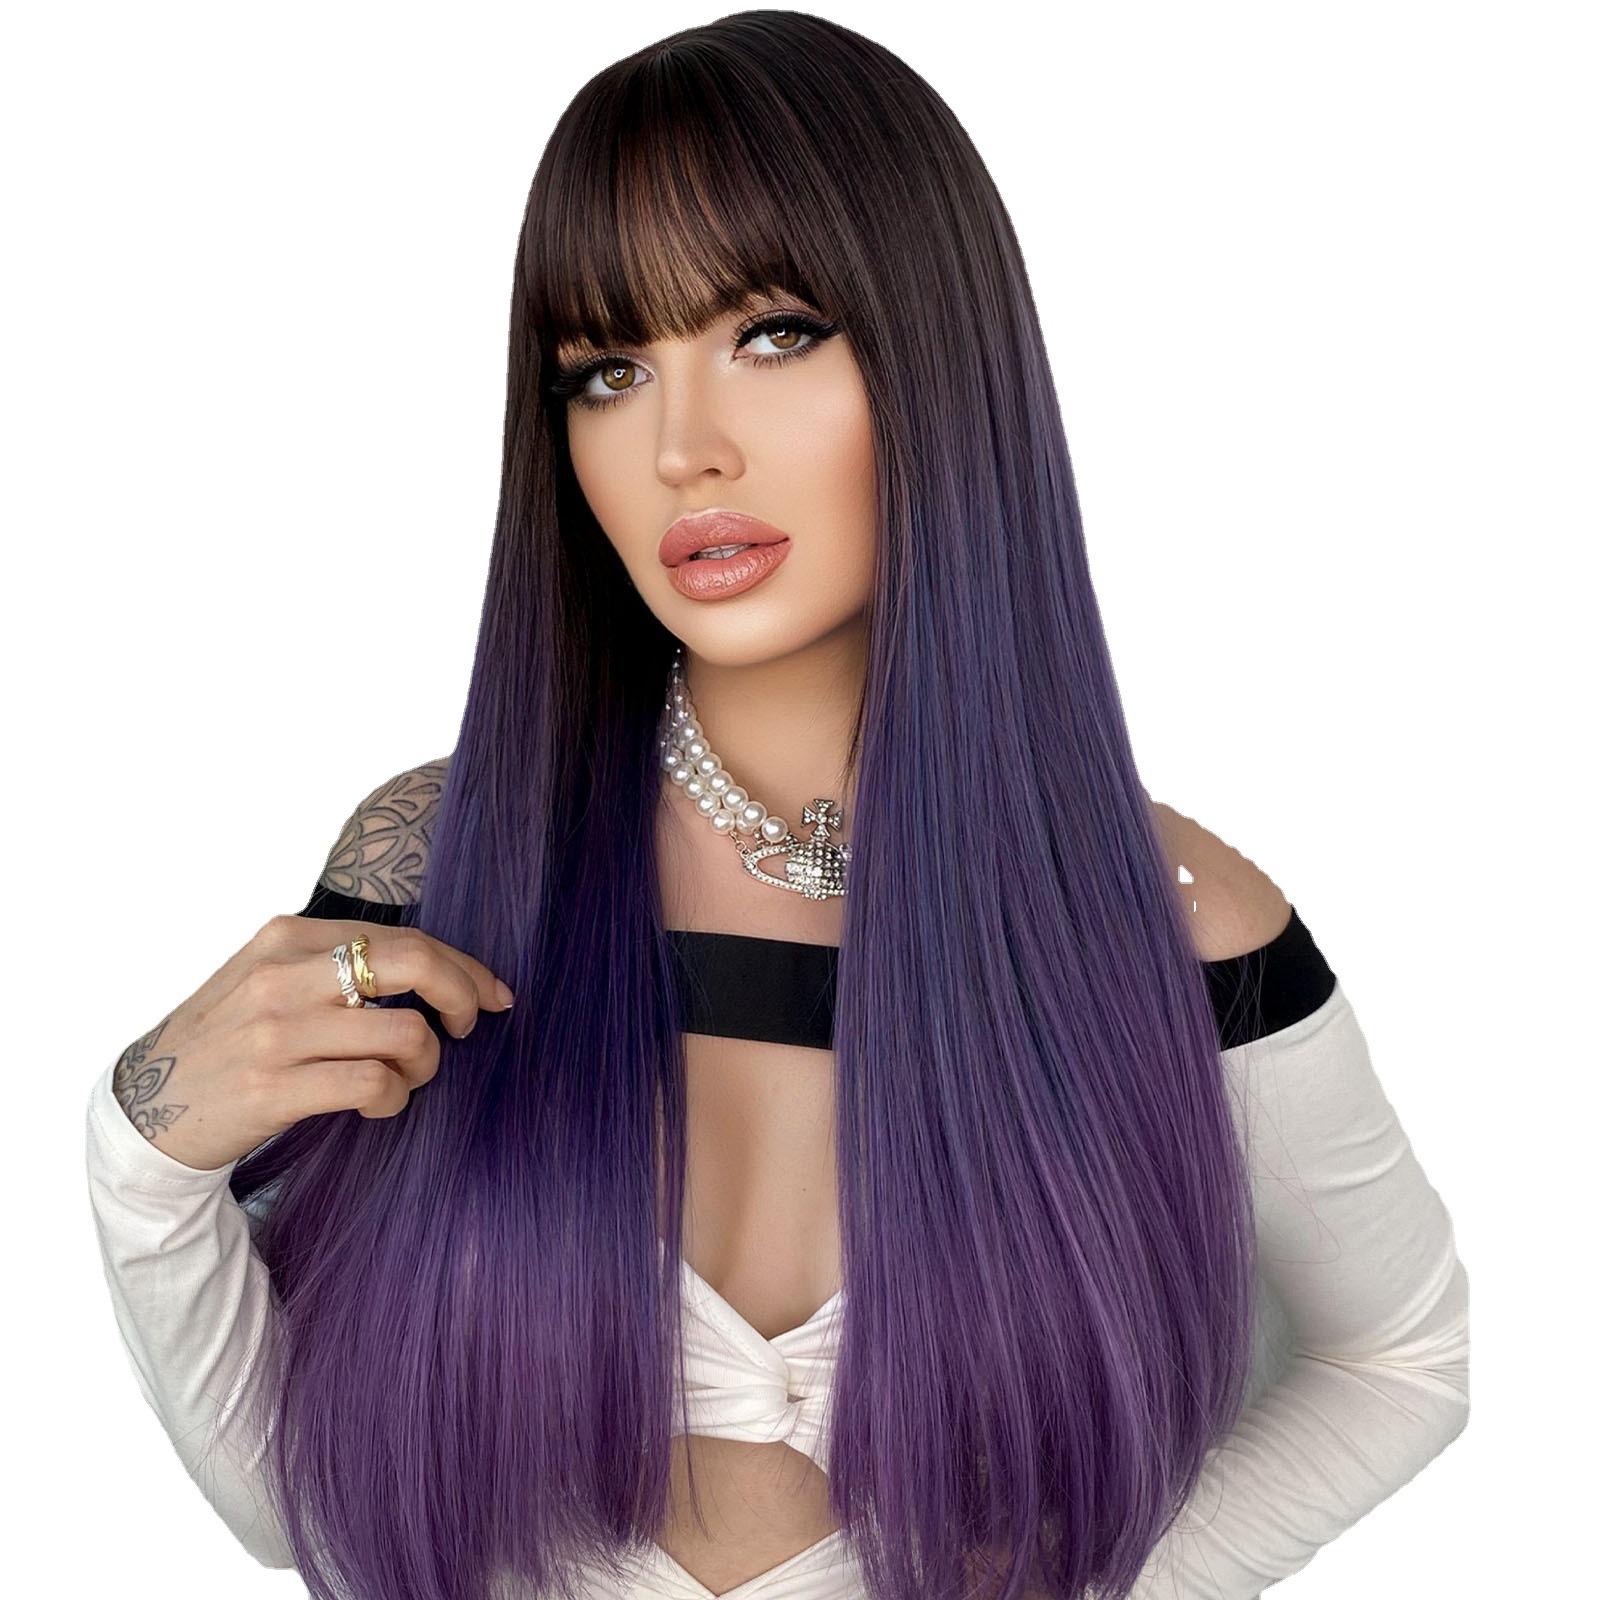 Ready-to-go synthetic wig by Yinraohair, featuring Barbie brown purple color, long straight hair with bangs, stylish full head set